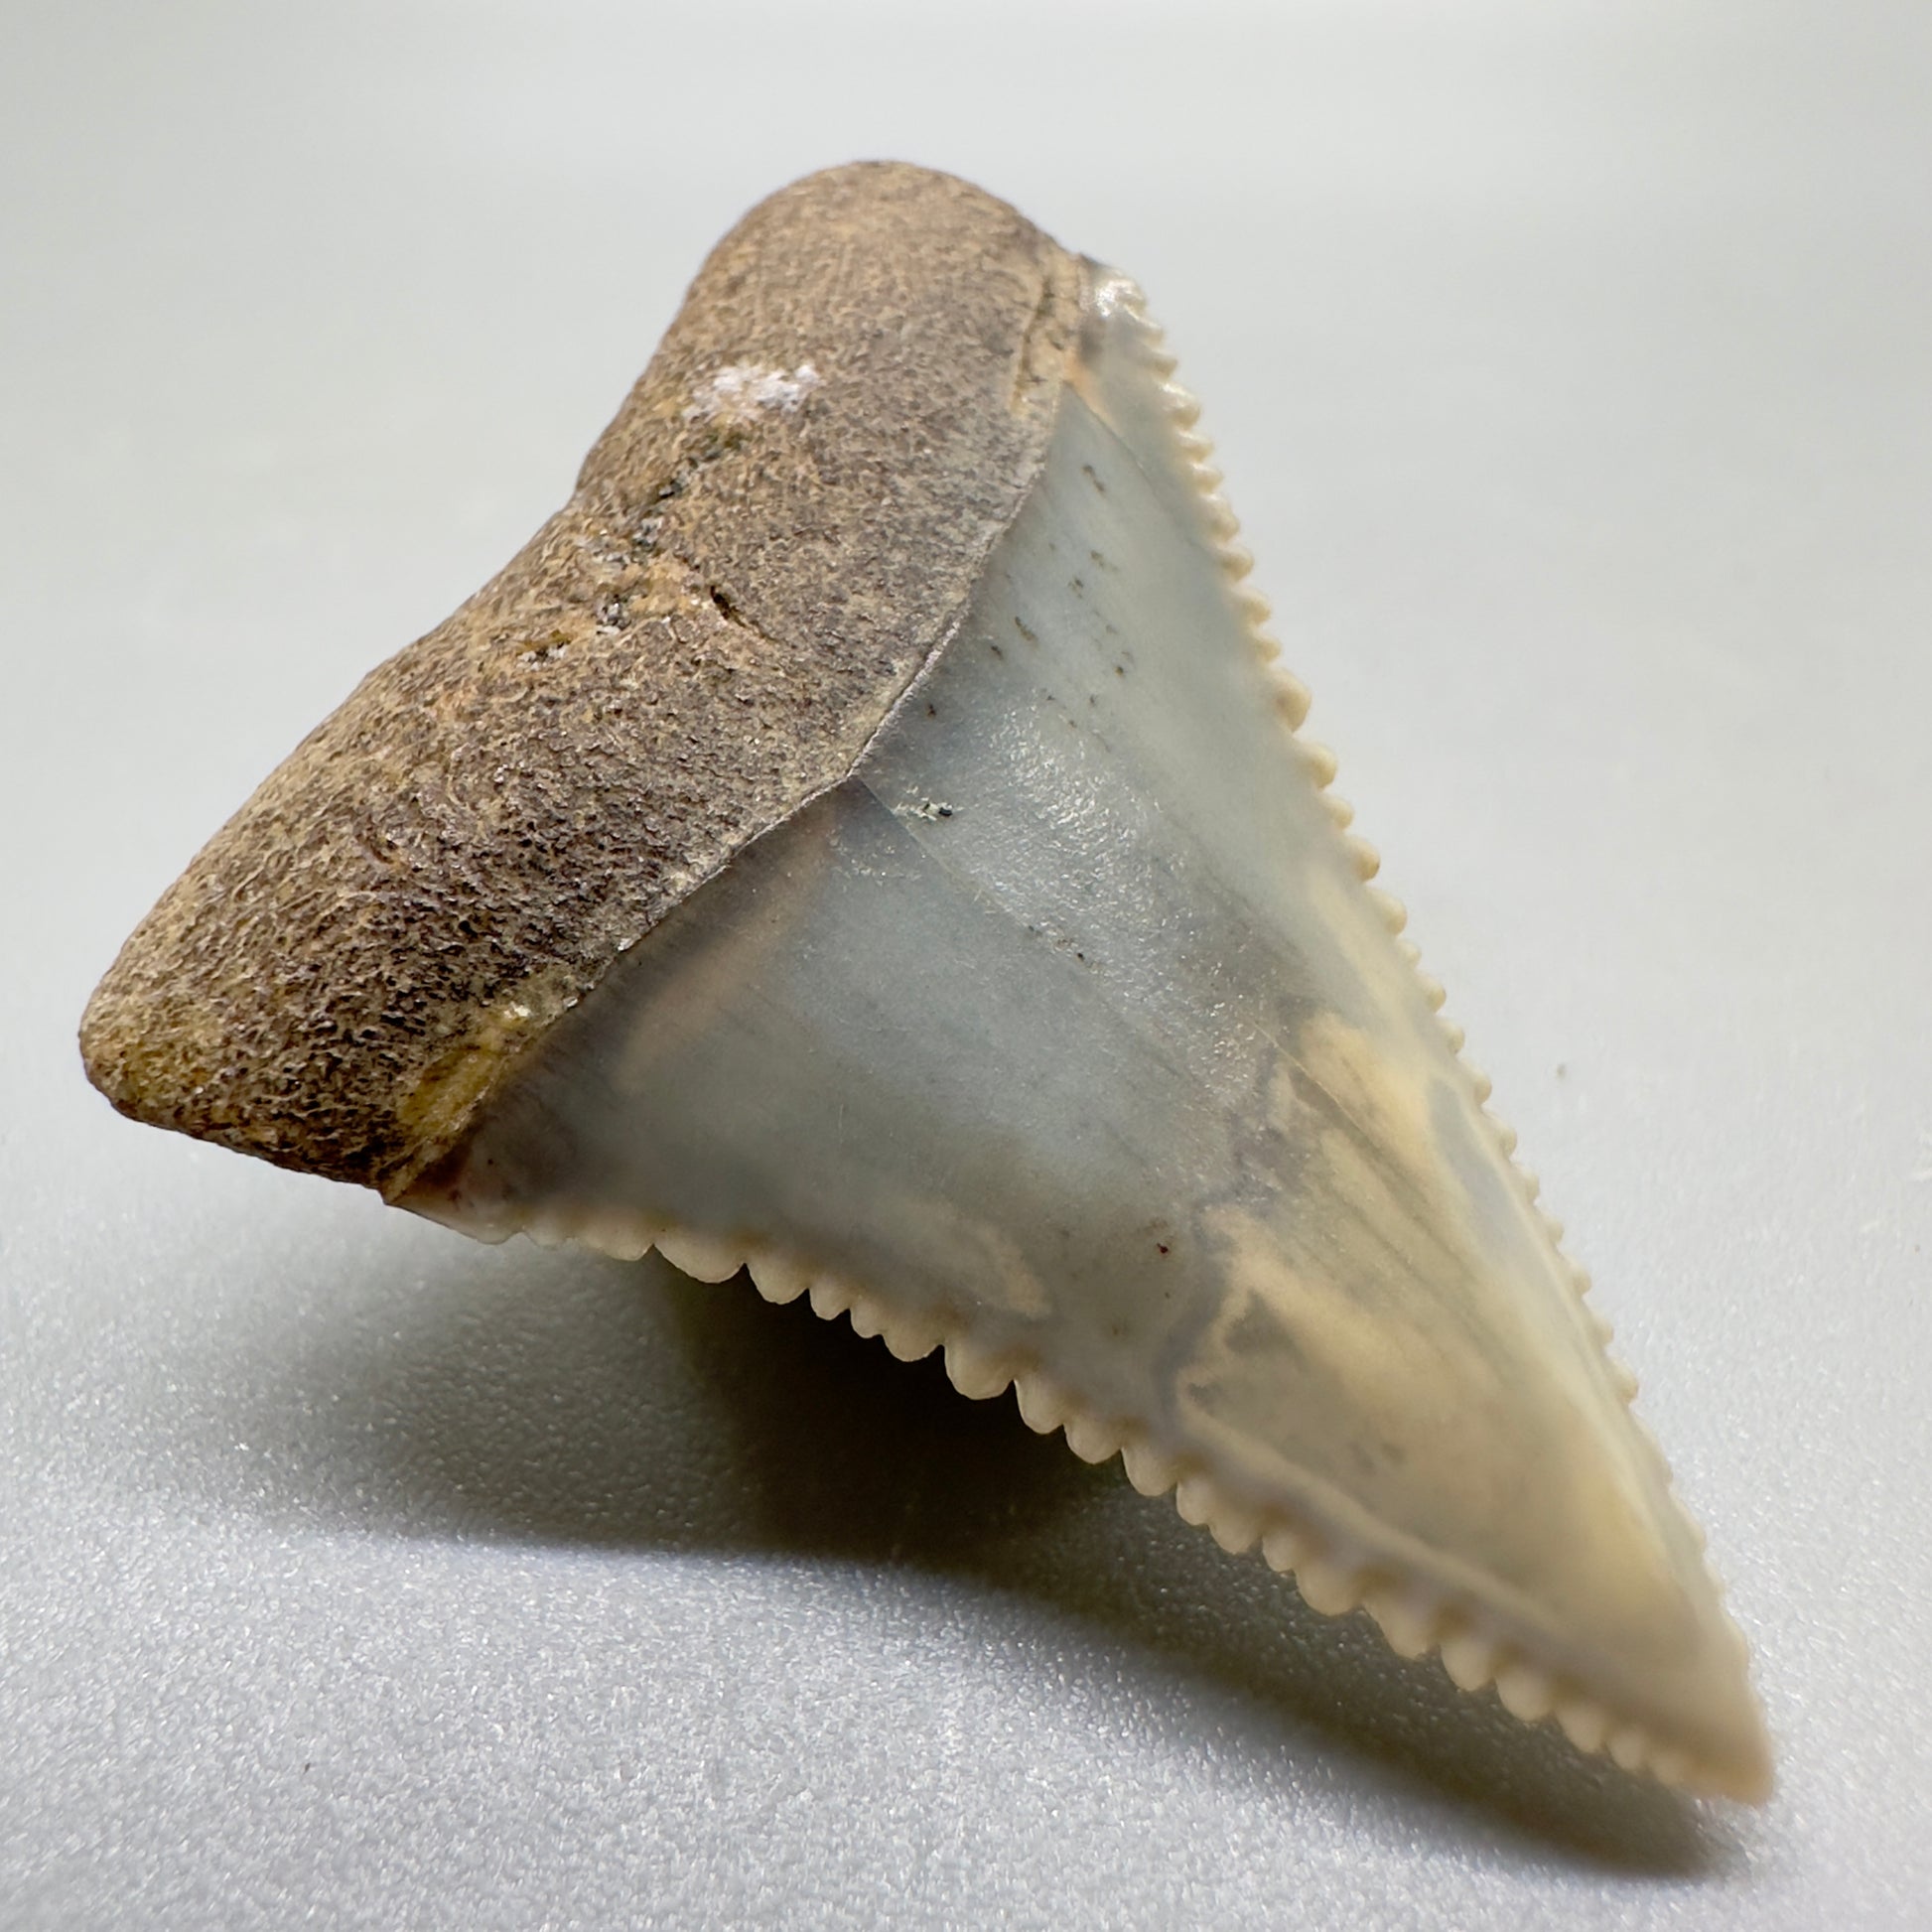 Serrated 1.51" Colorful Fossil Great White Tooth from Sacaco, Peru - Unique Collectible GW1052 - Front left